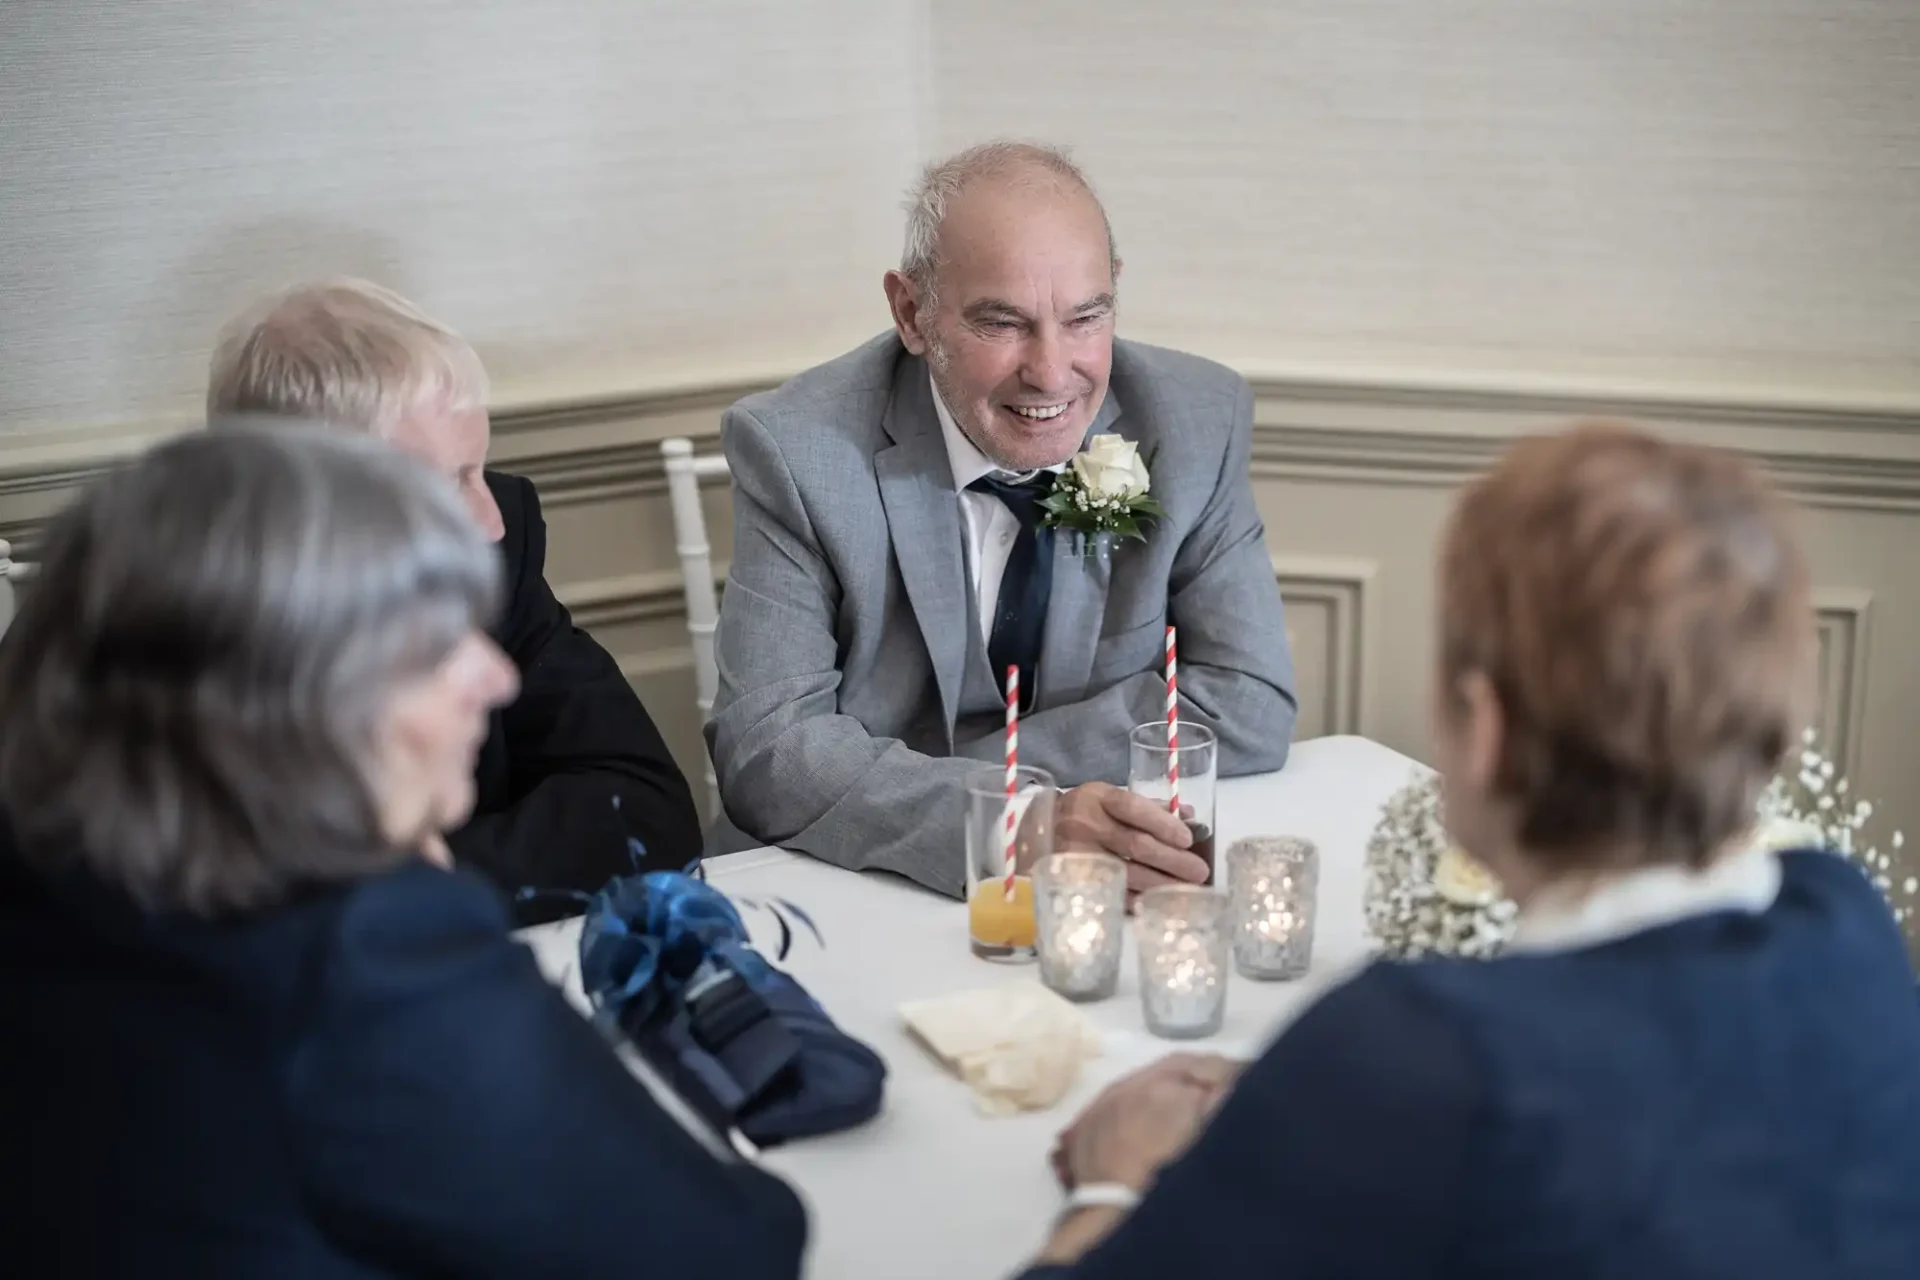 Elderly man with a boutonniere laughing at a table with three other guests at a formal event, featuring candles and drinks with straws.